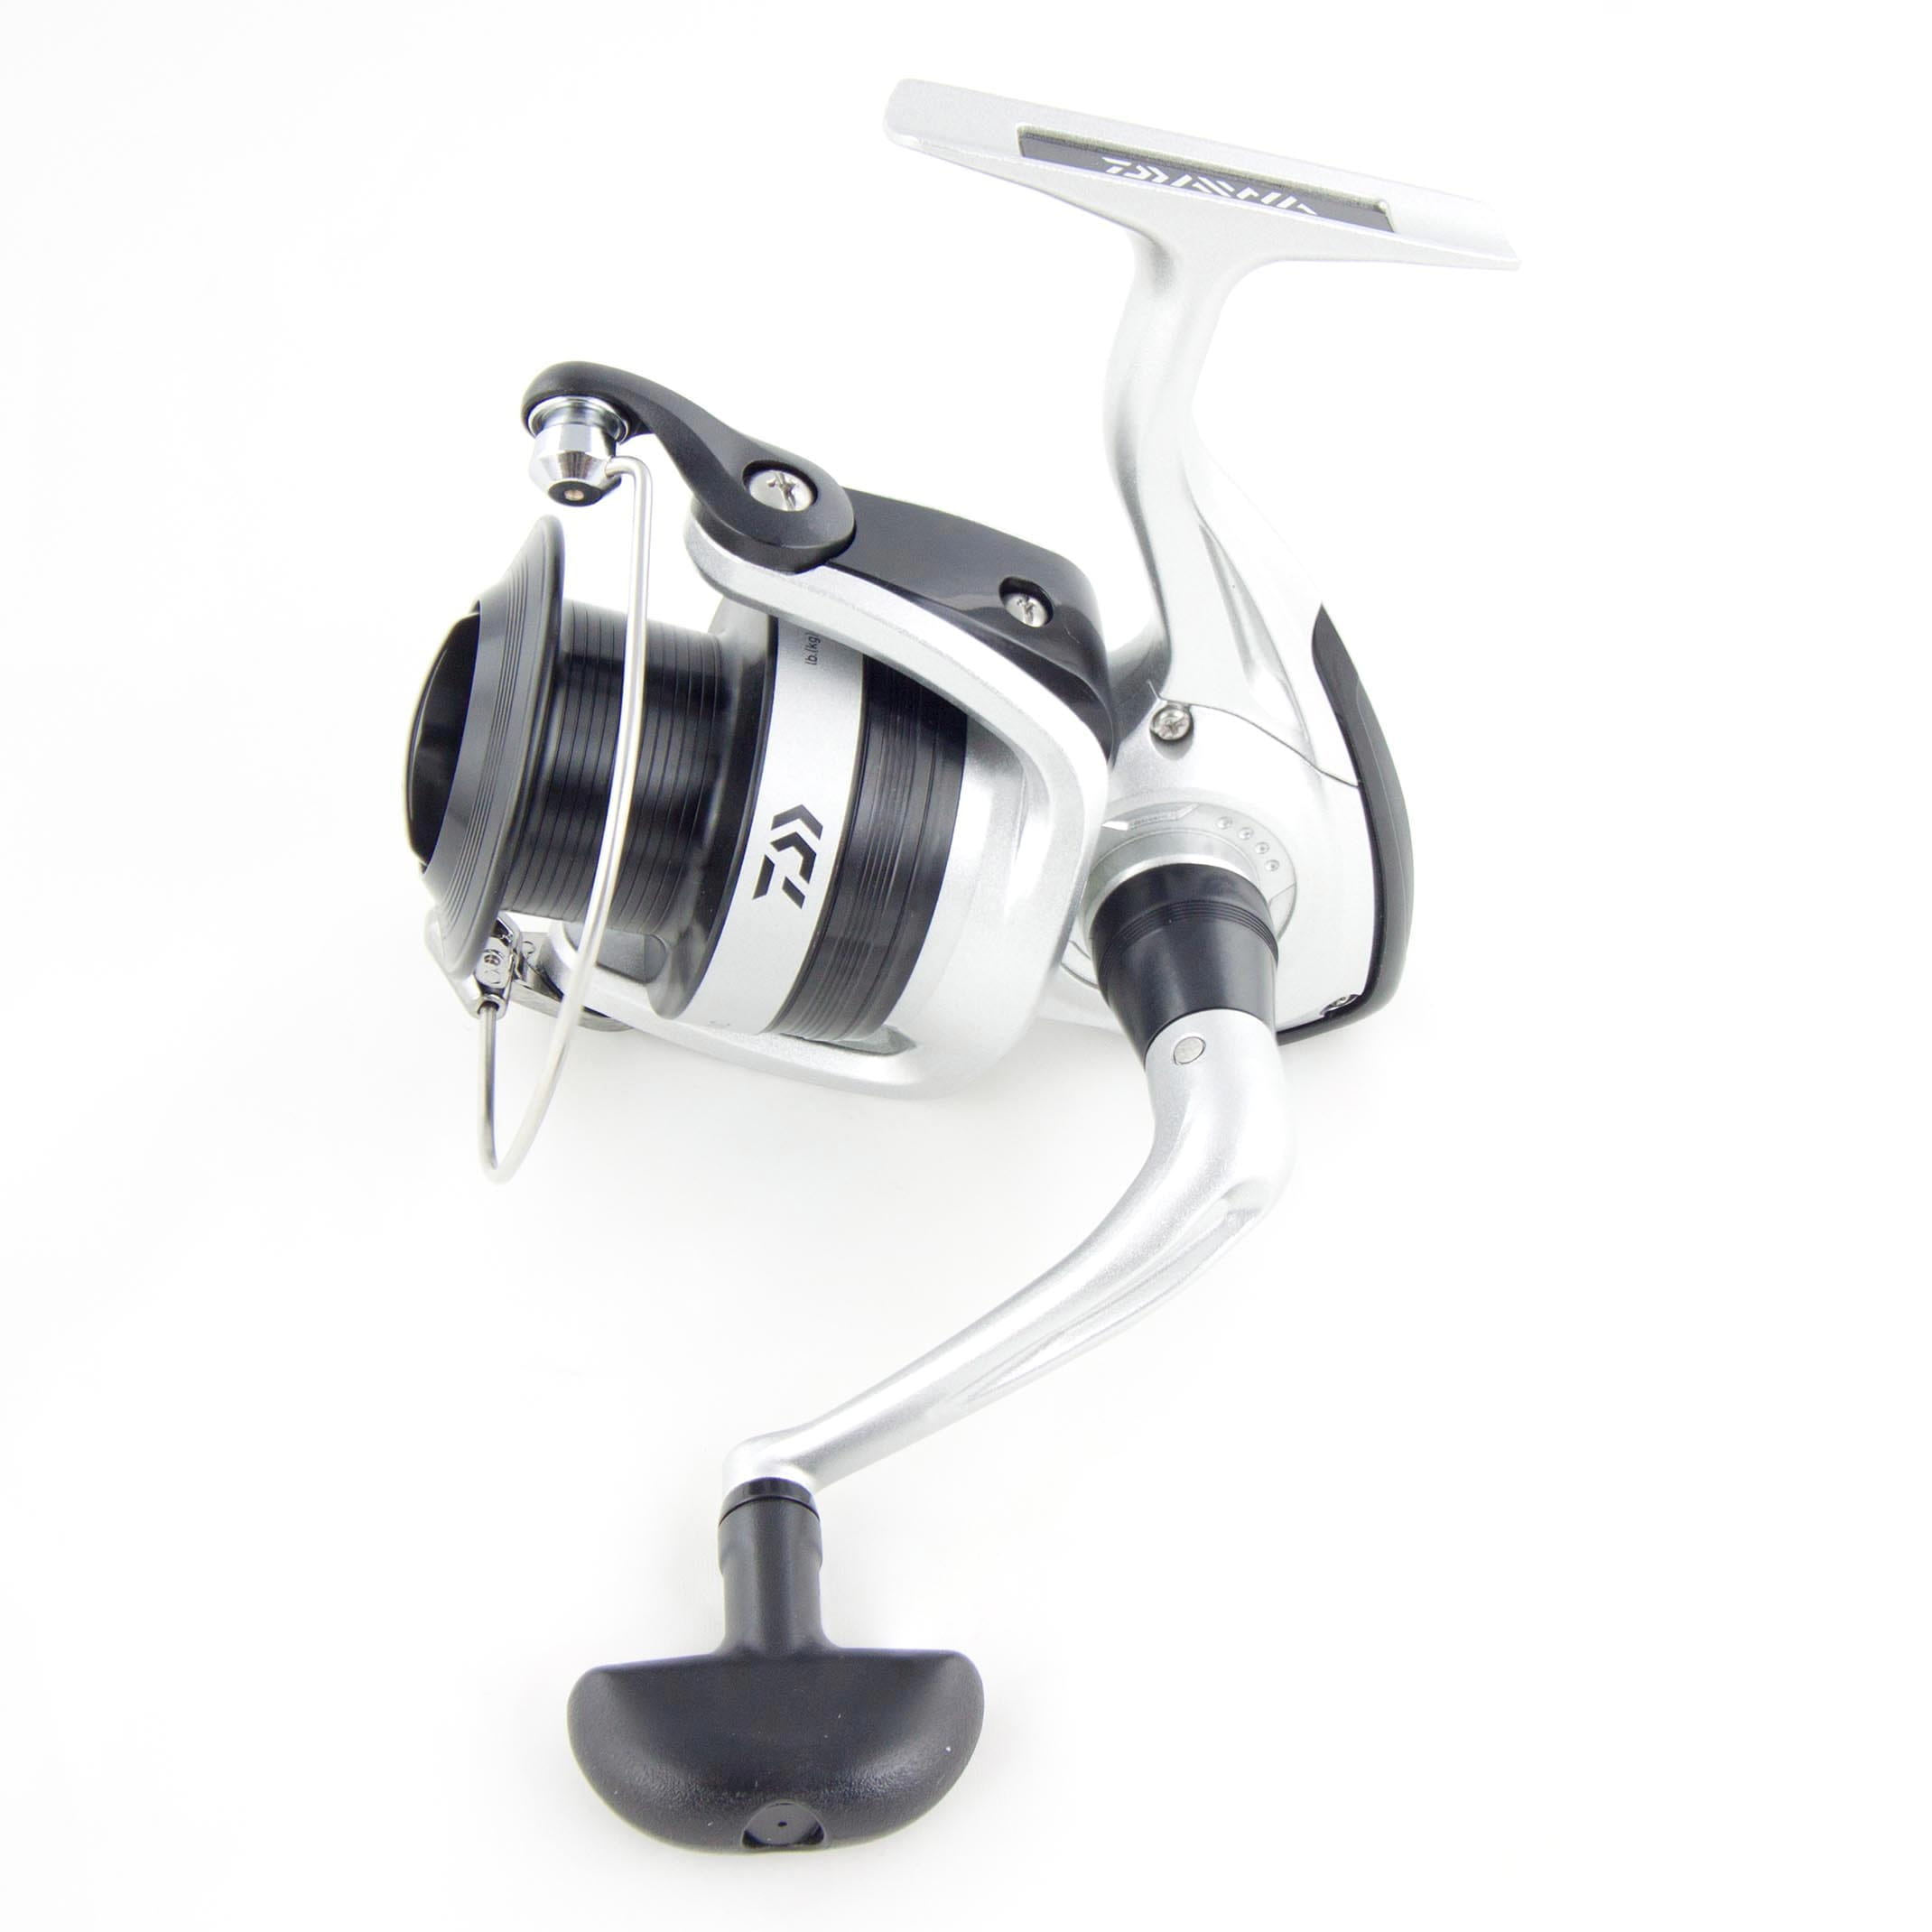 Daiwa Sweepfire EC Frontbrenmse